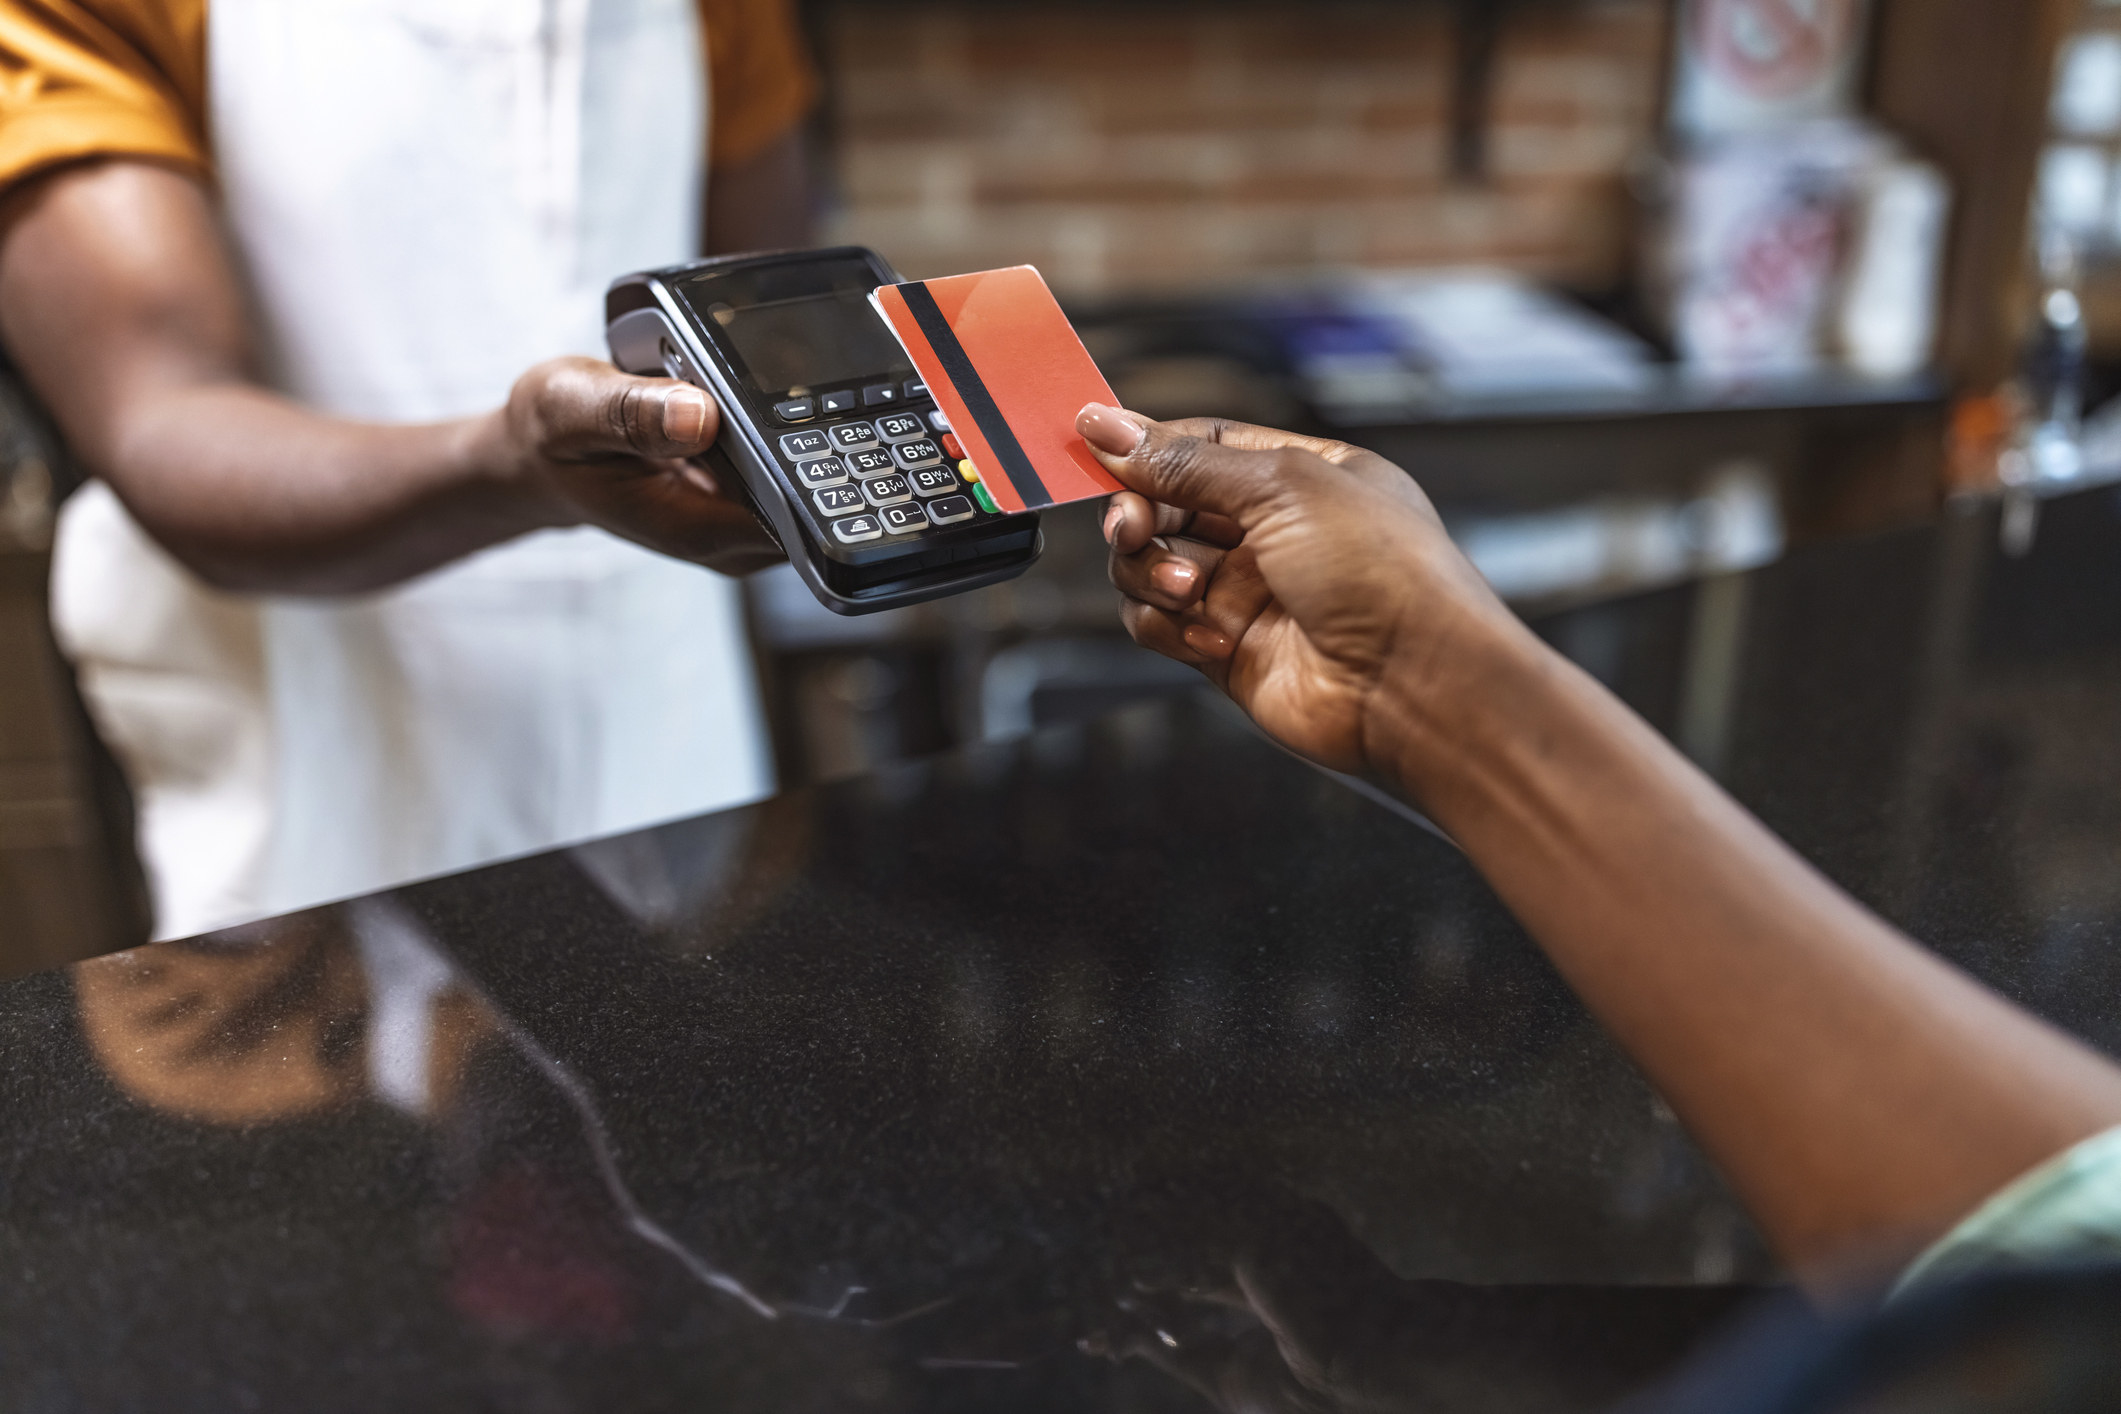 A woman paying with a credit card.